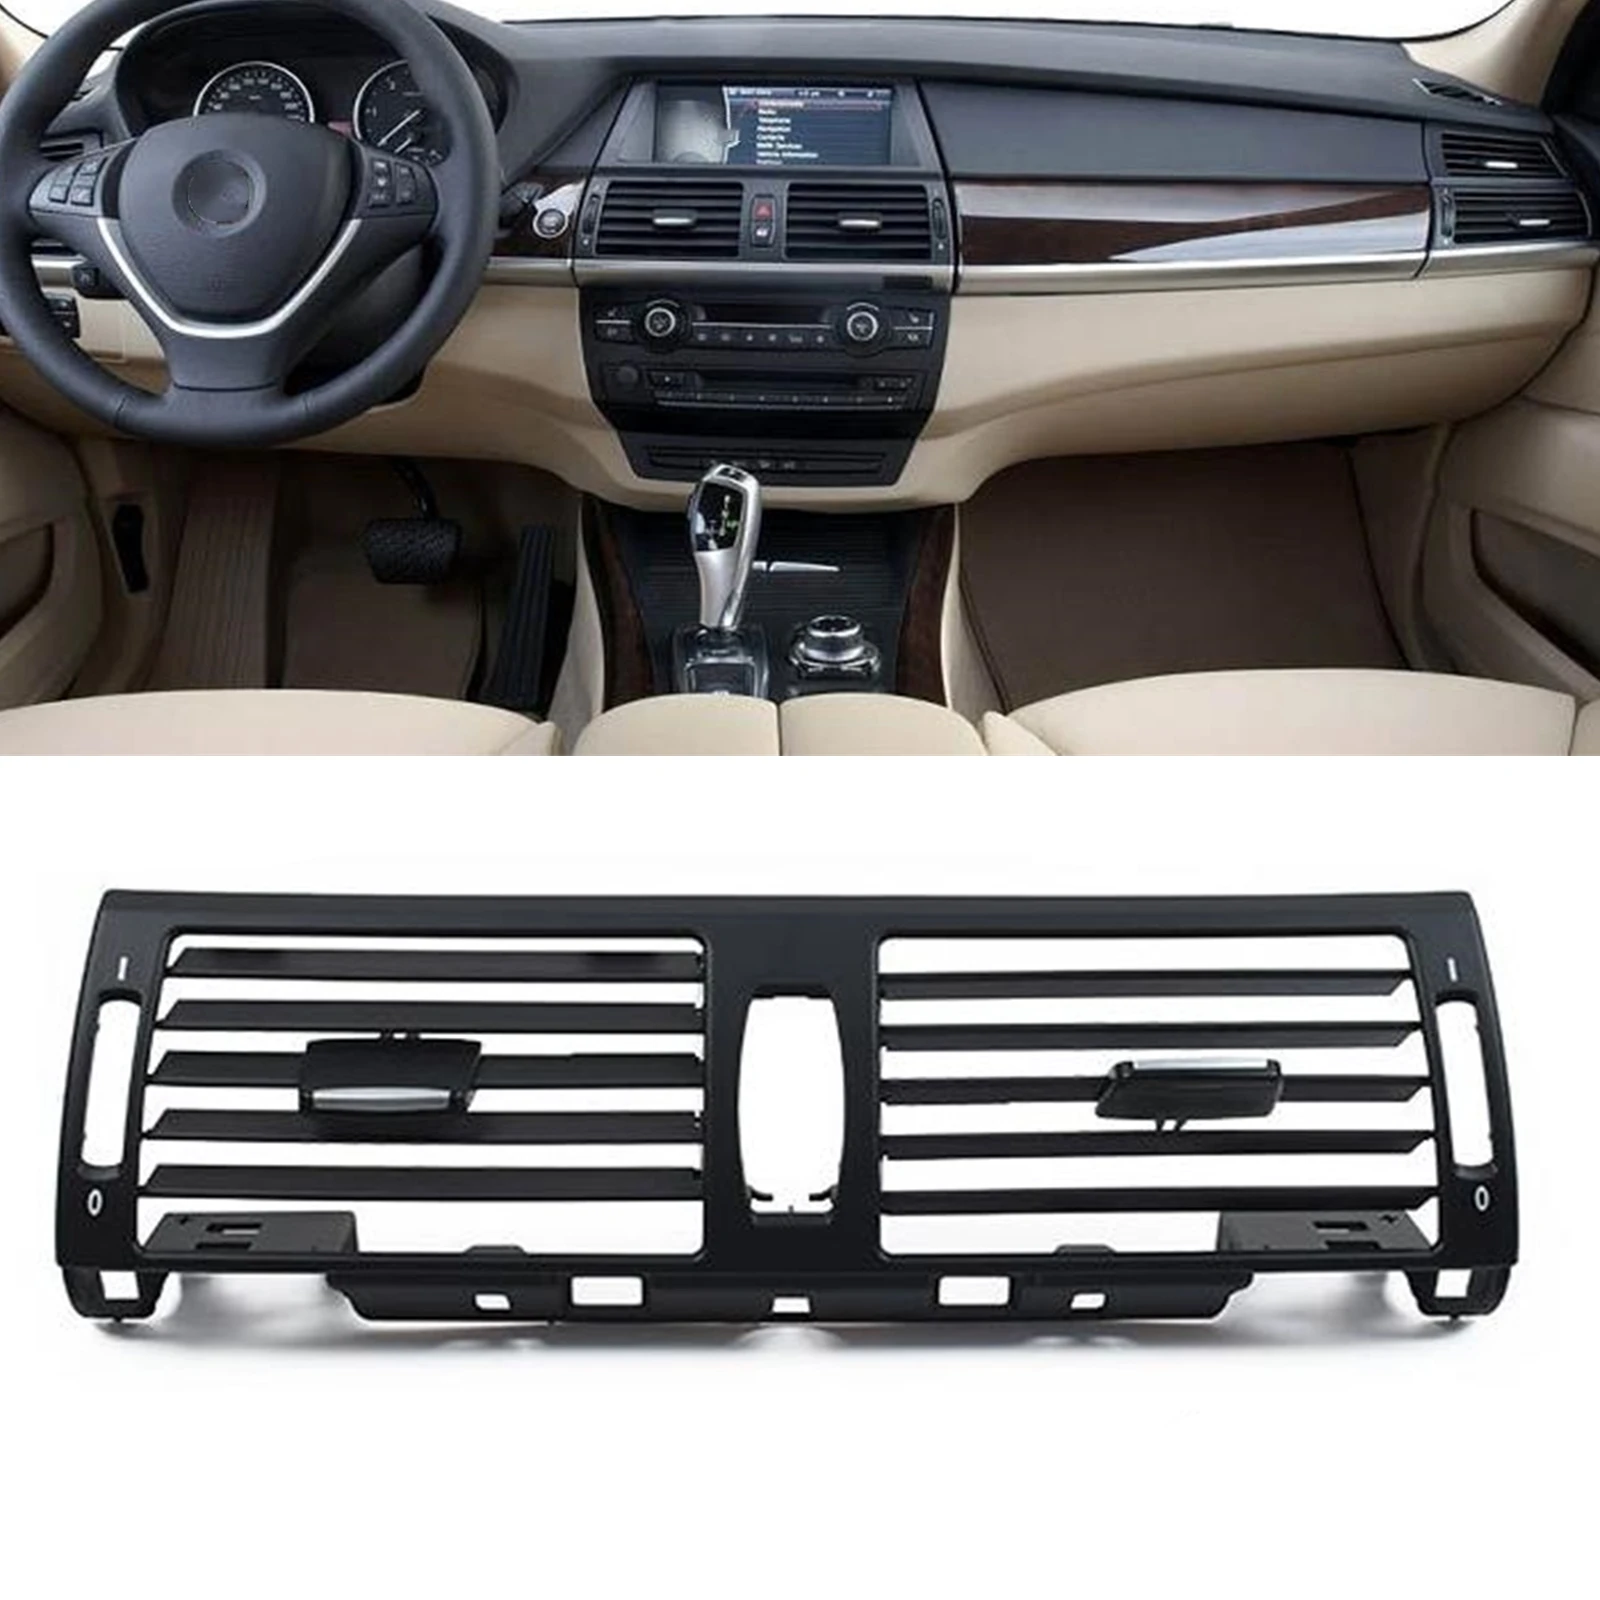 

Car Front Center Air Outlet Vent Conditioning Panel Grill Cover Trim Dasnboard Grille For BMW X5 E70 2007-2013 X6 E71 2008-2014